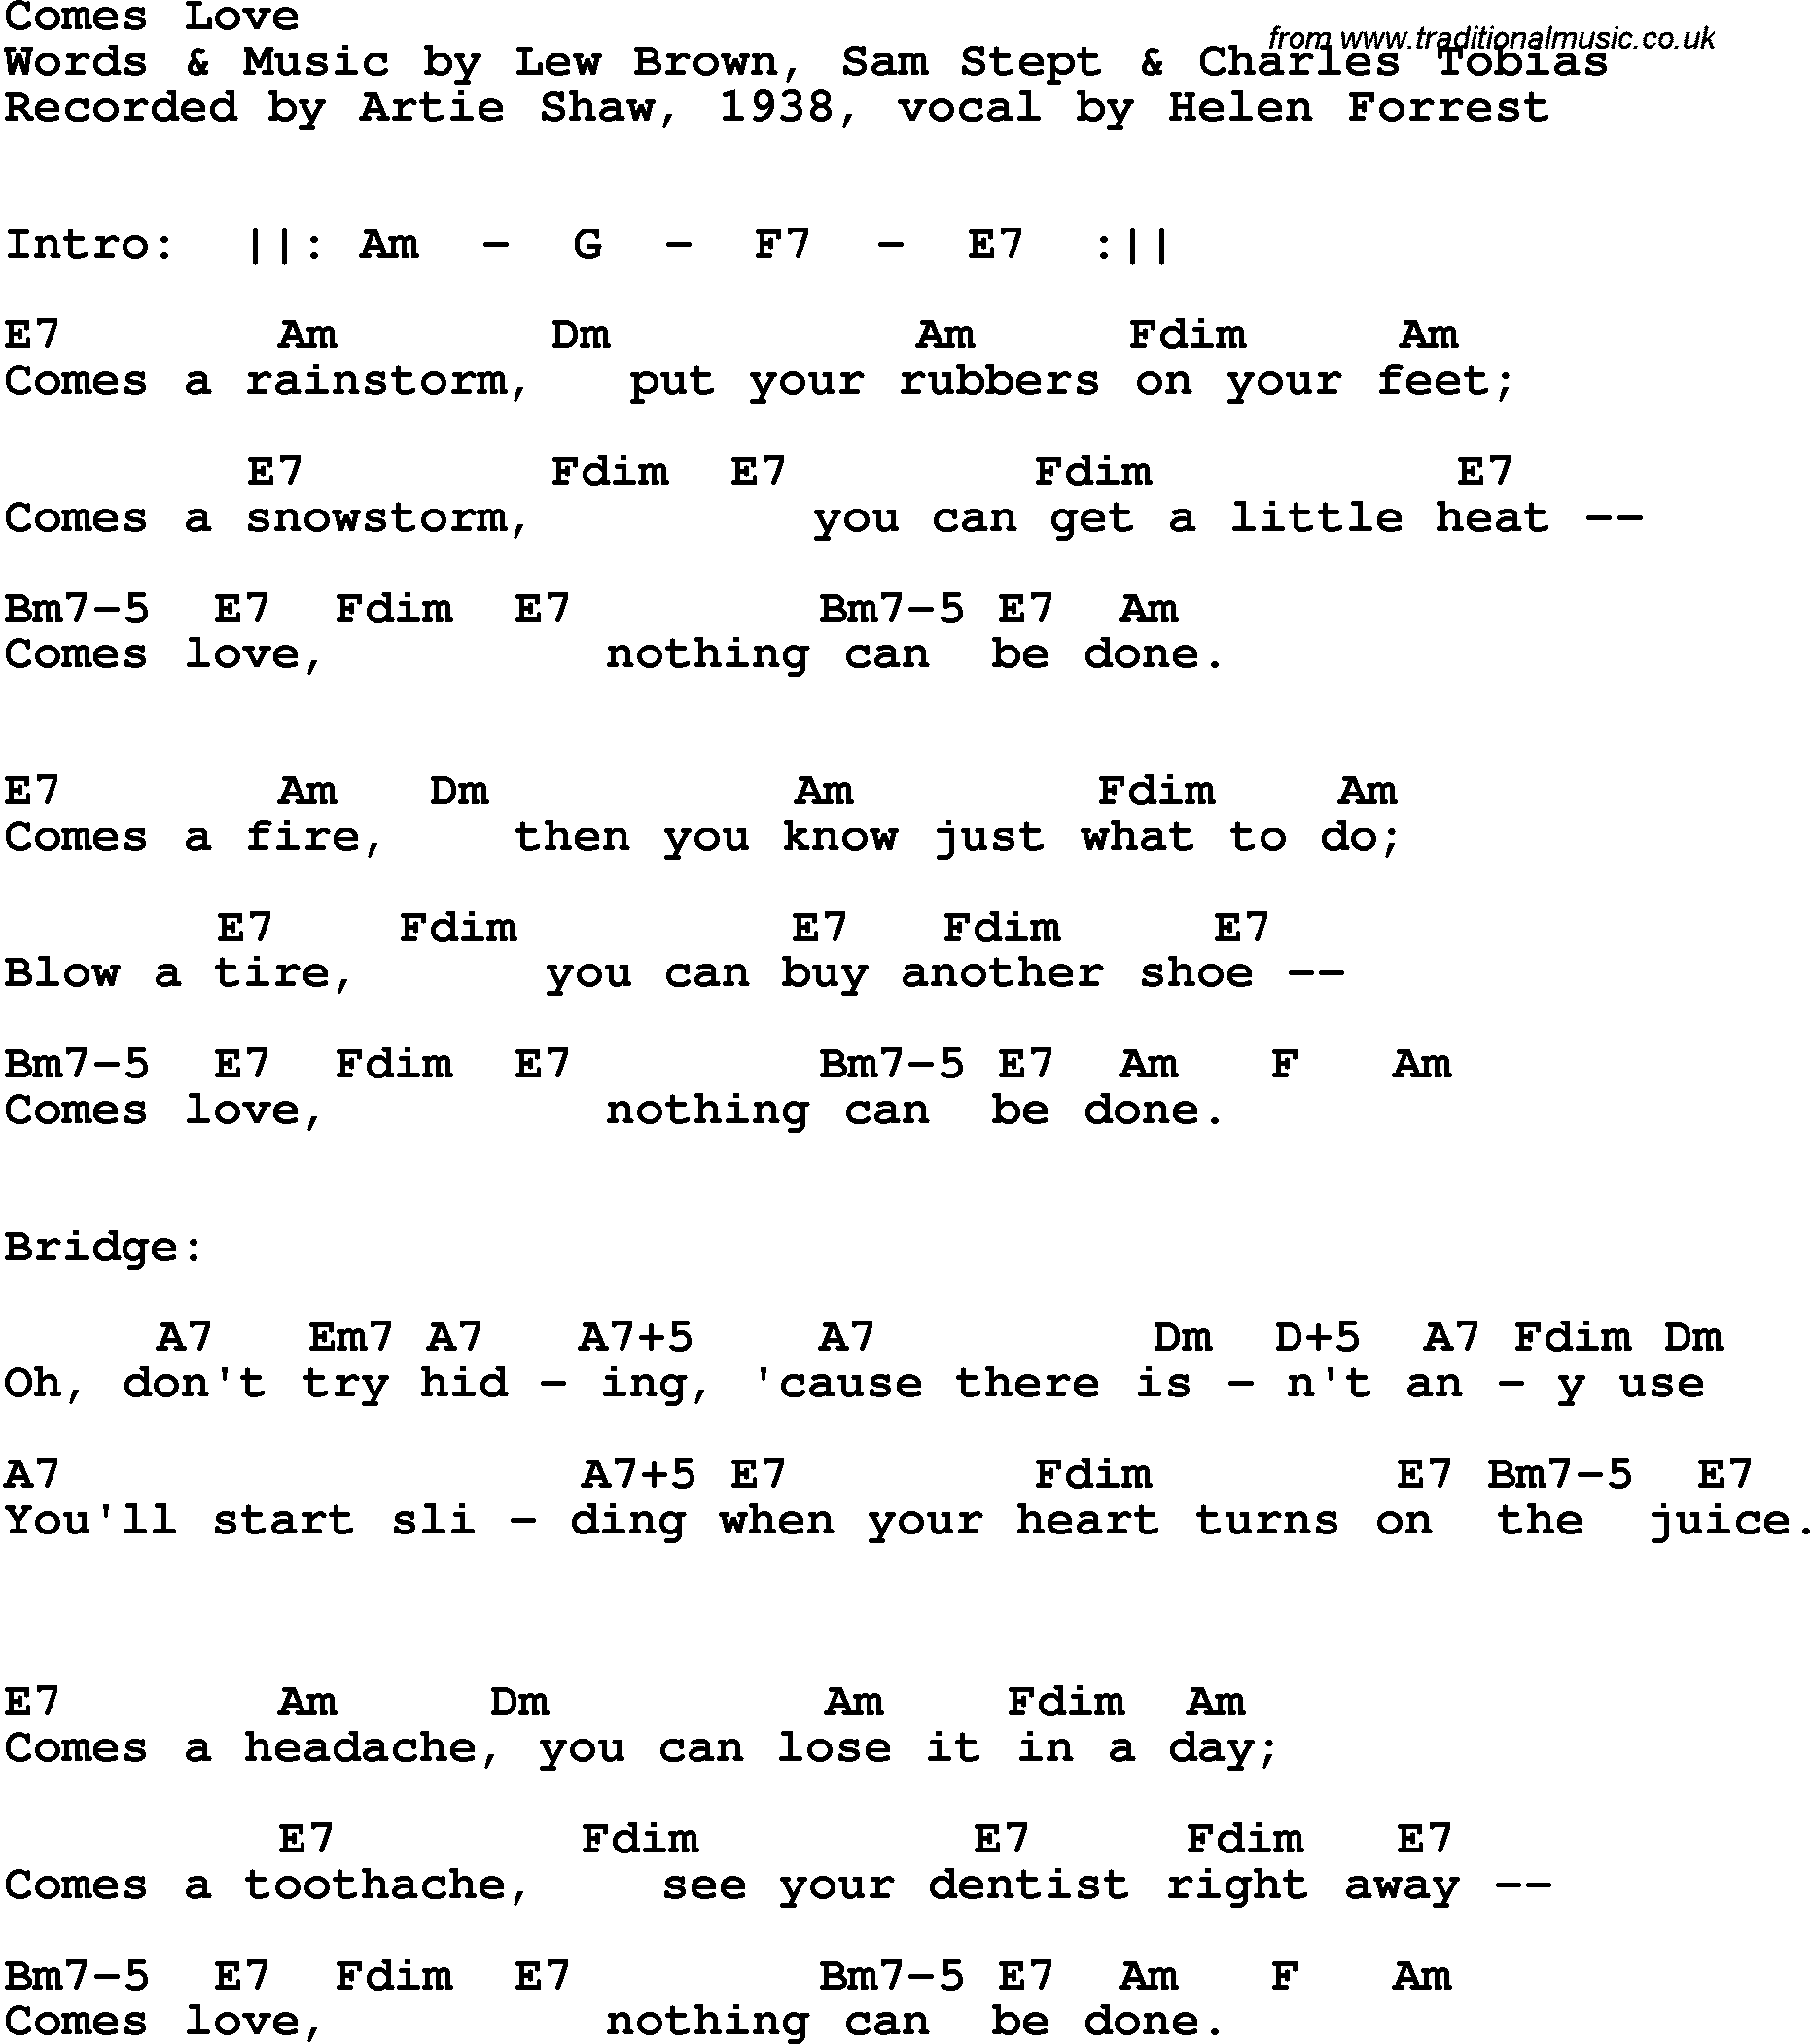 Song Lyrics with guitar chords for Comes Love - Artie Shaw, 1938, Helen Forrest Vocal